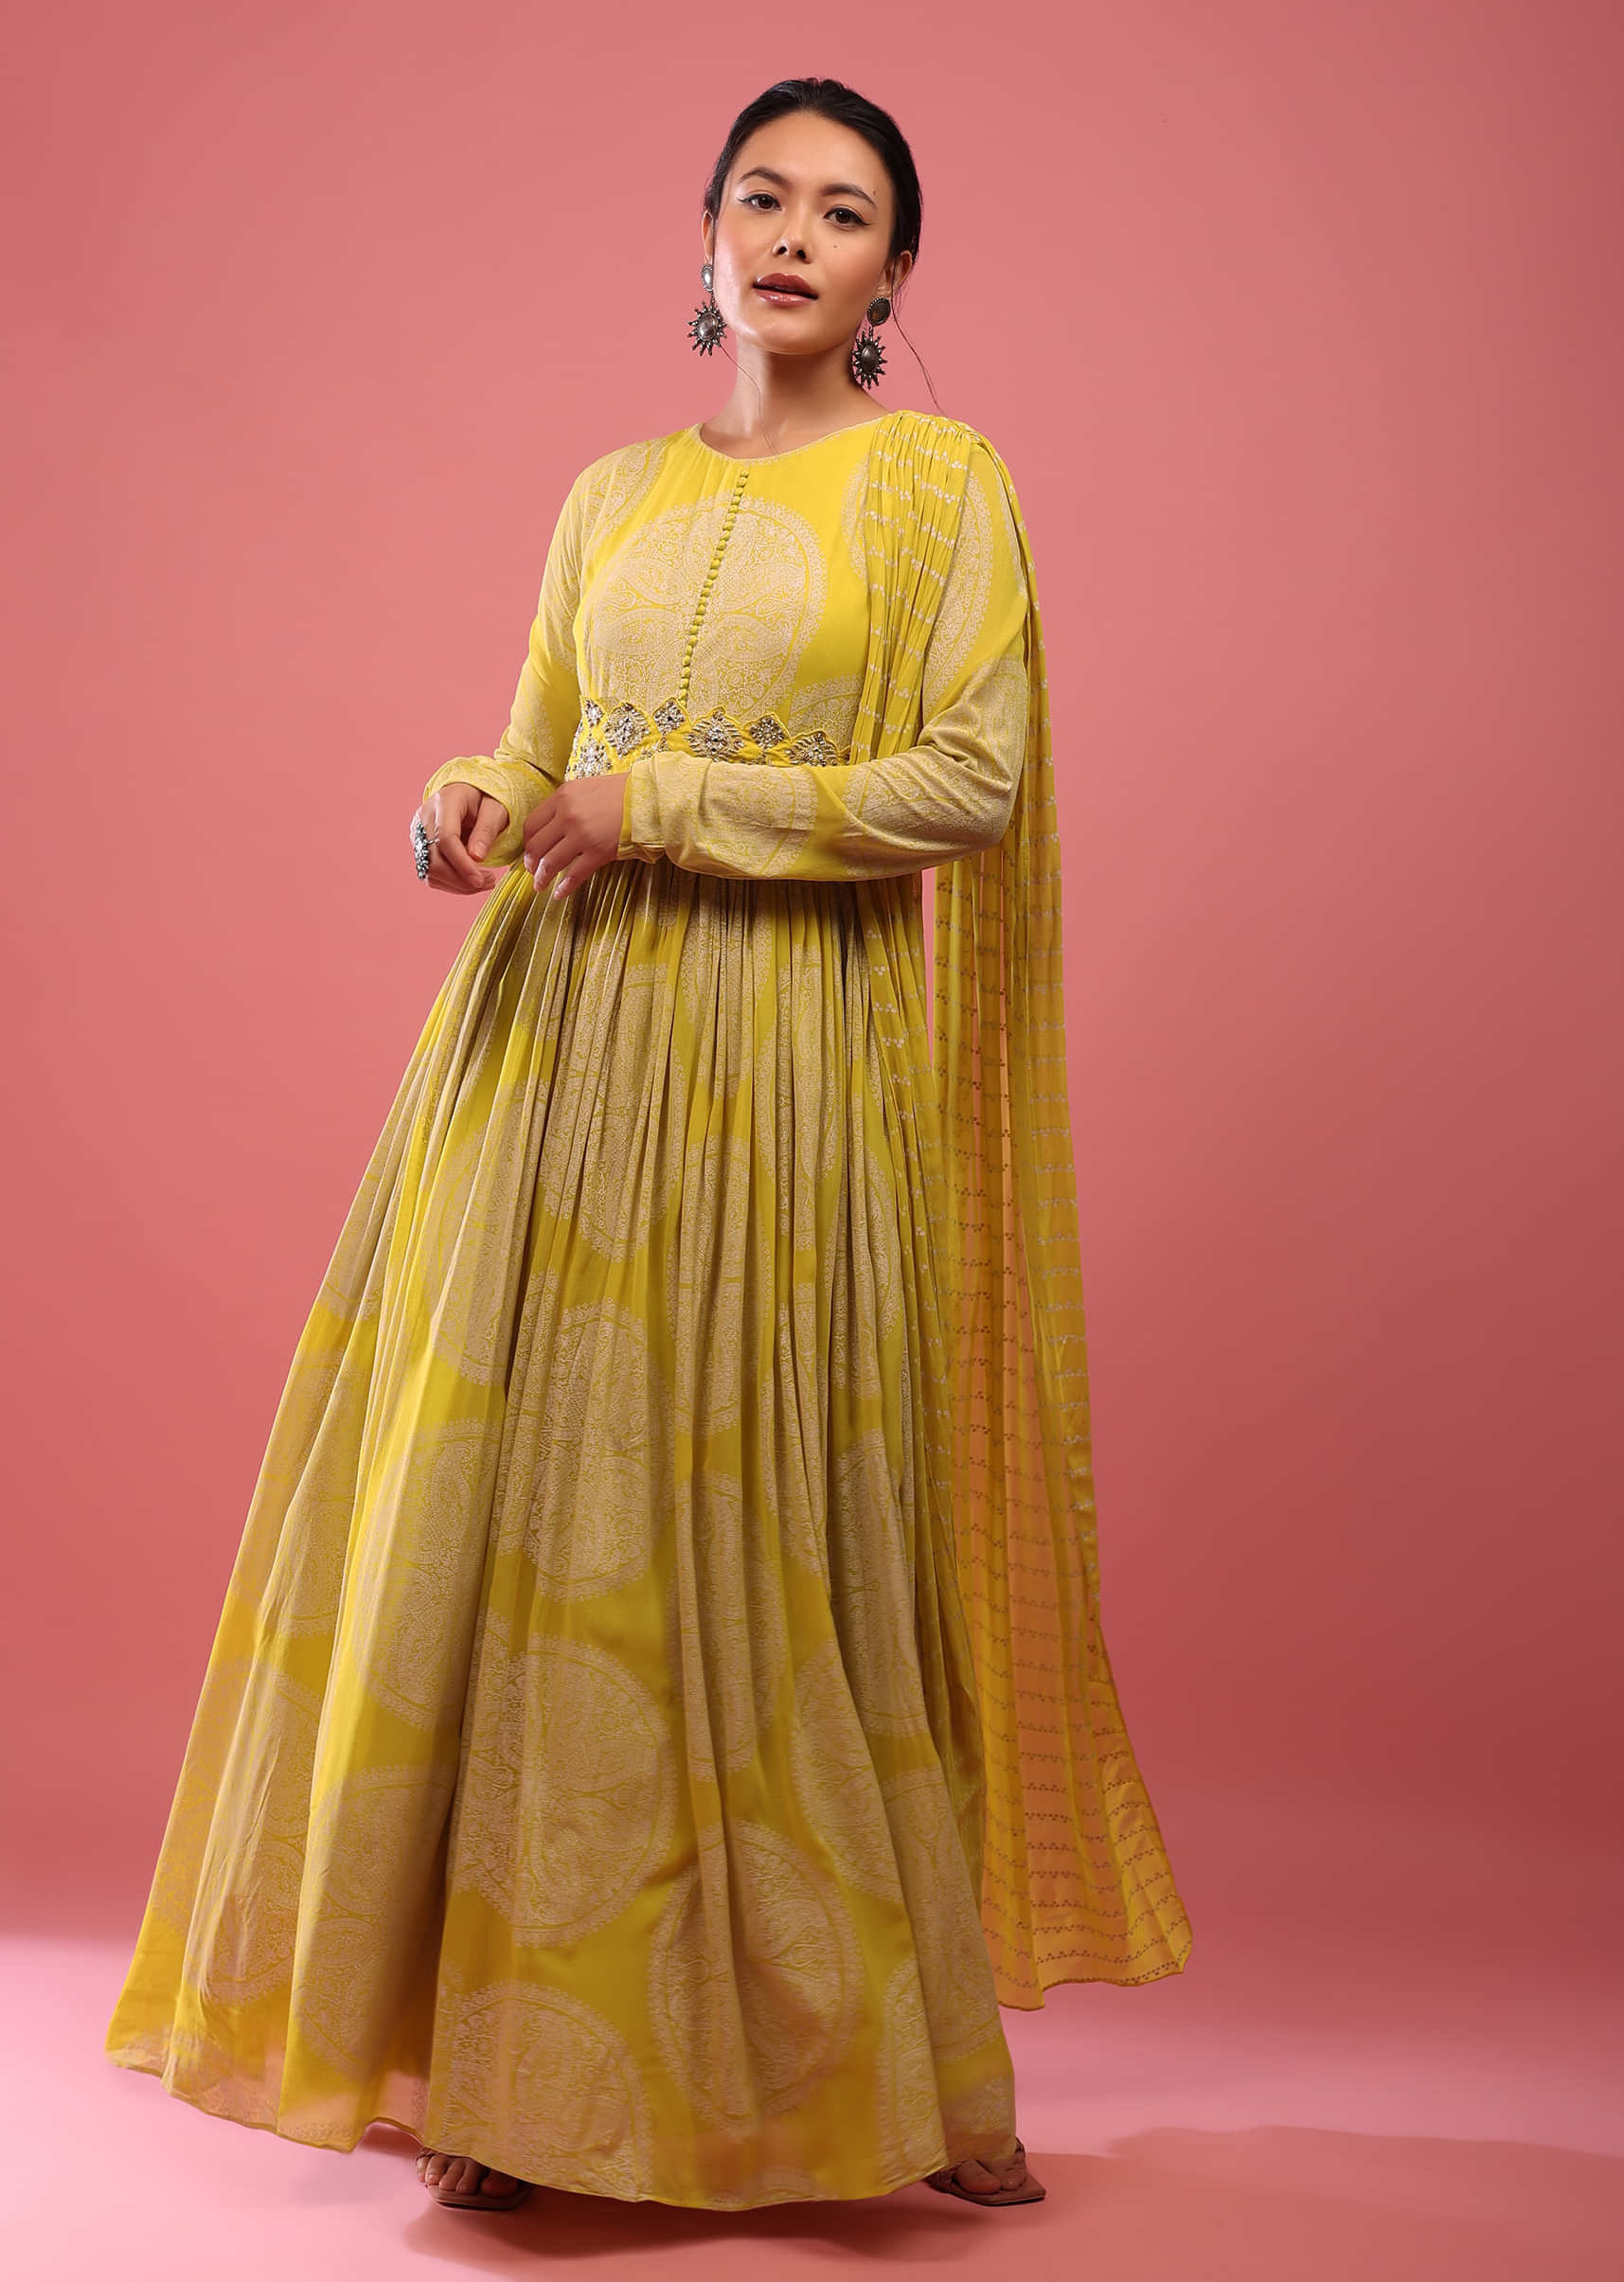 Canary Yellow Anarkali Suit In Georgette With Attached Dupatta And Floral Embroidered Waistbelt